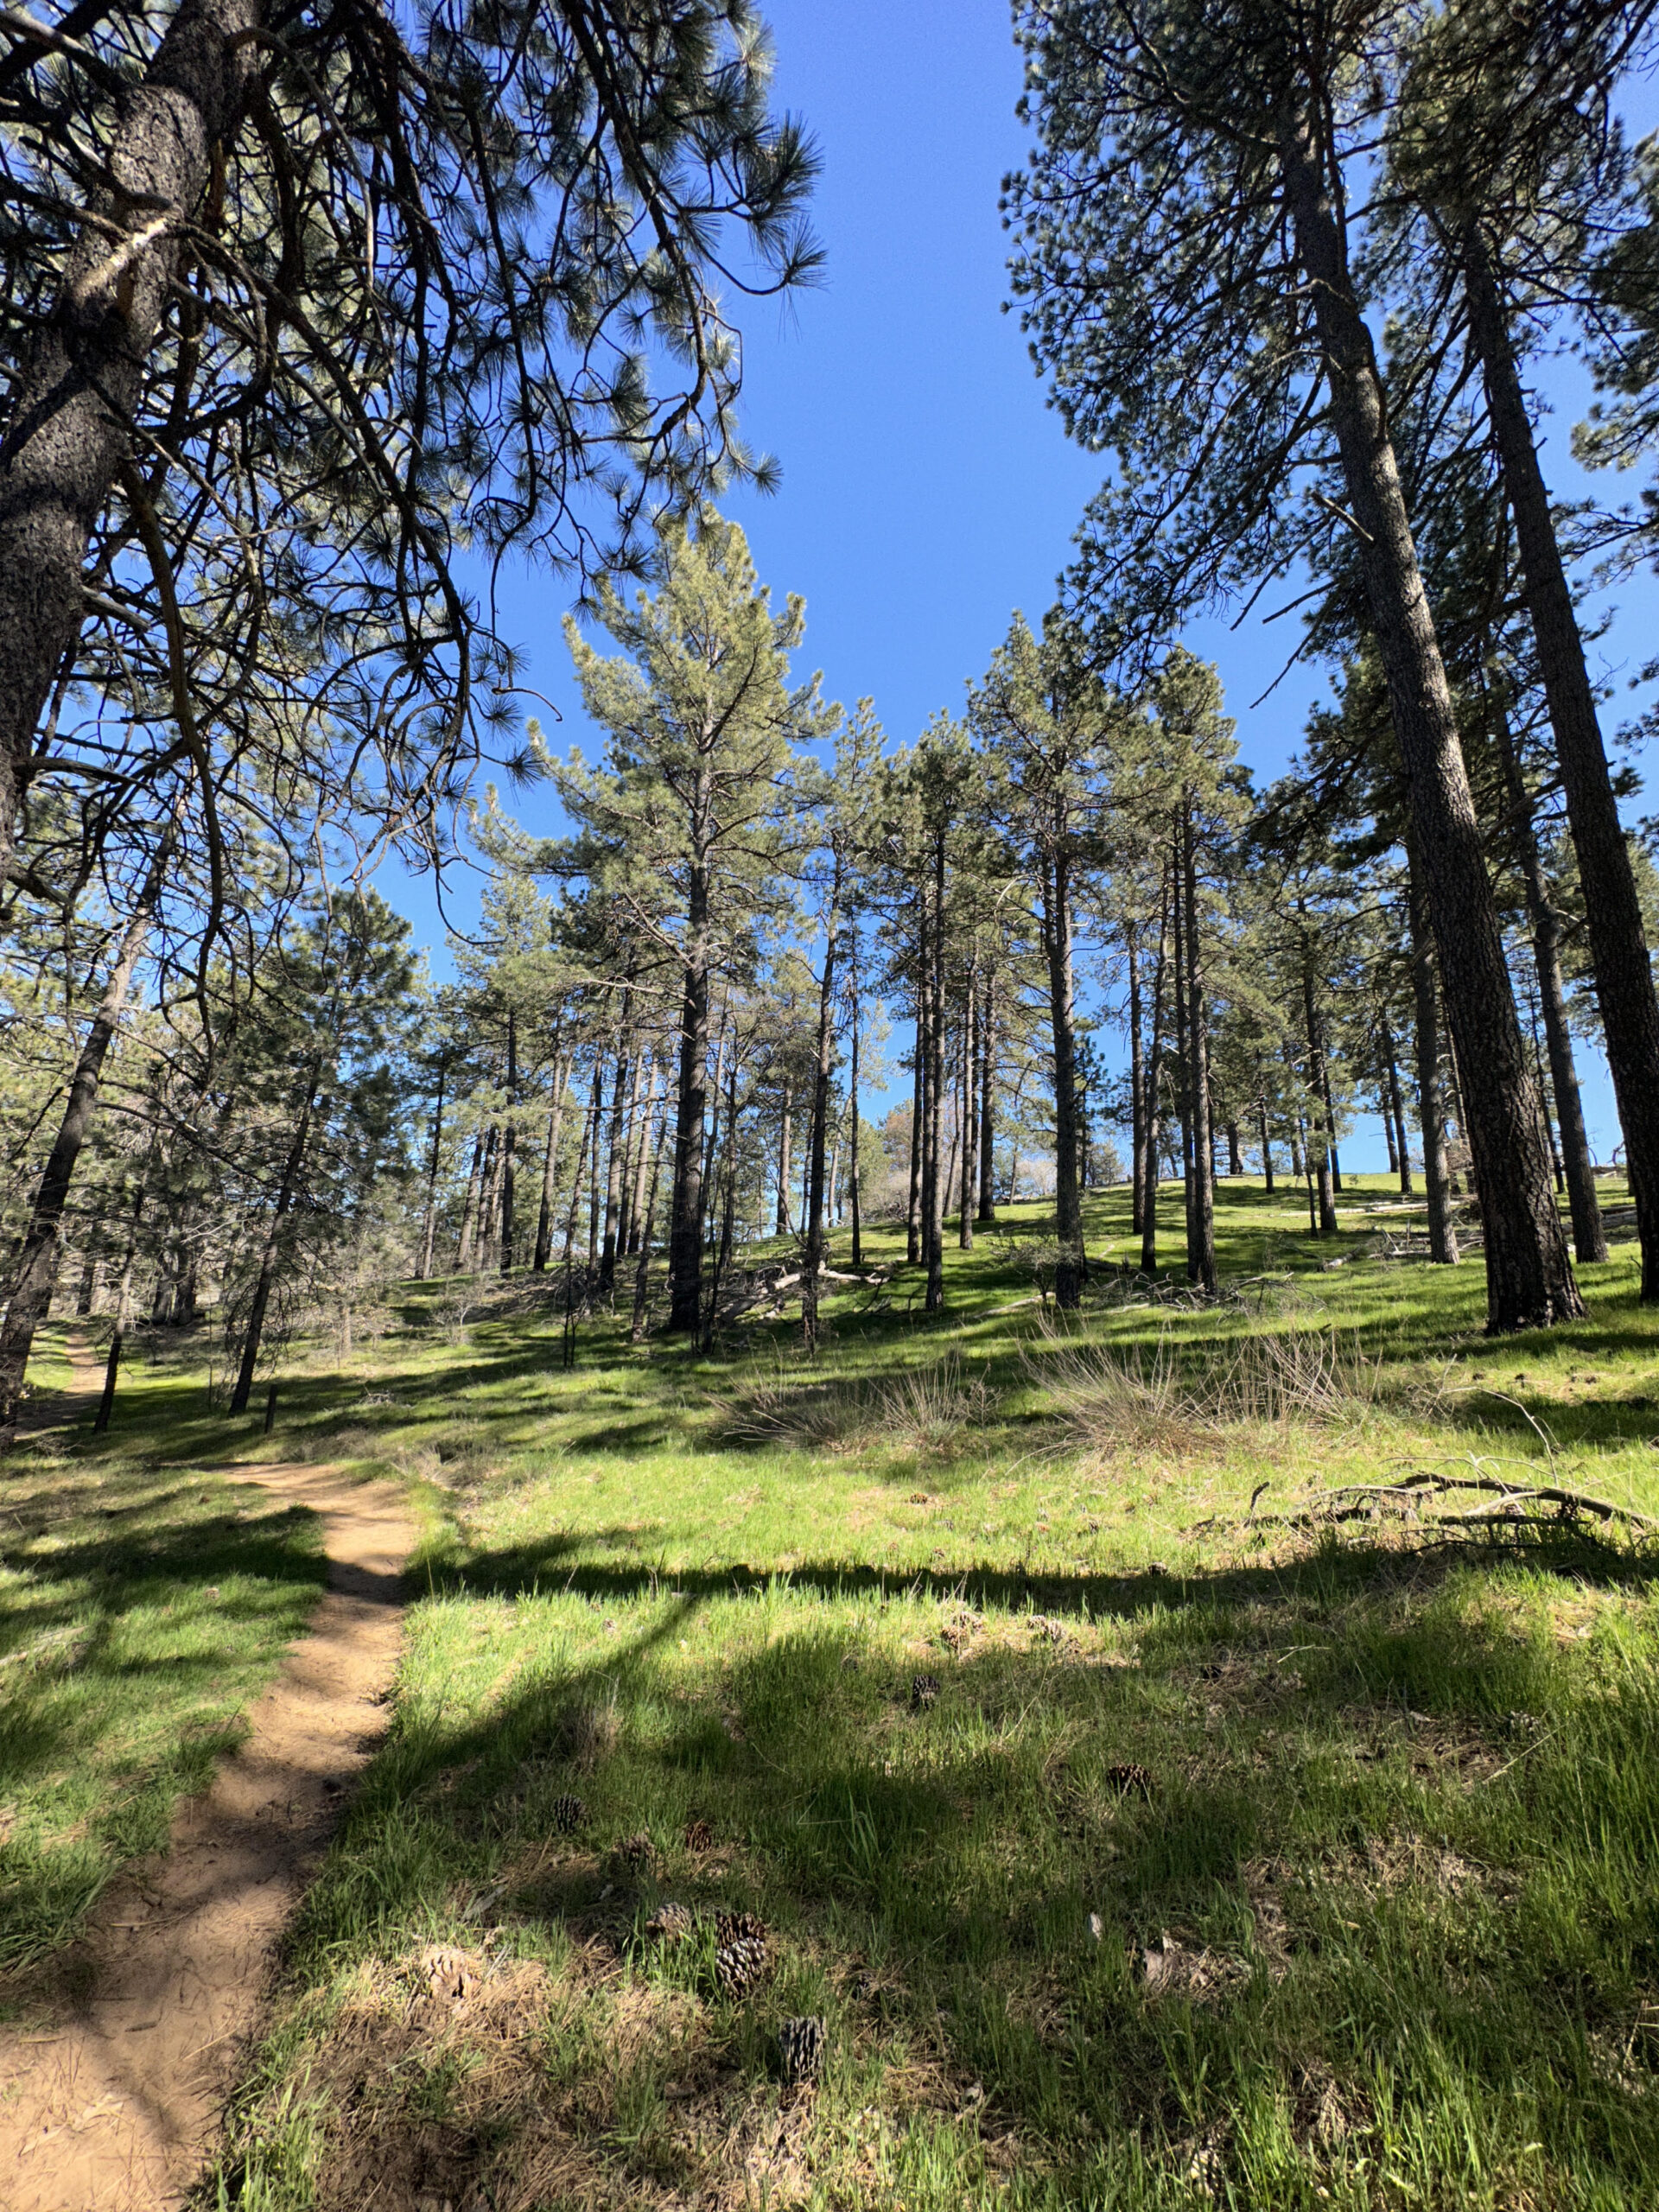 A narrow dirt trail through an open, grassy pine forest in the Laguna Mountains on a clear, sunny day.